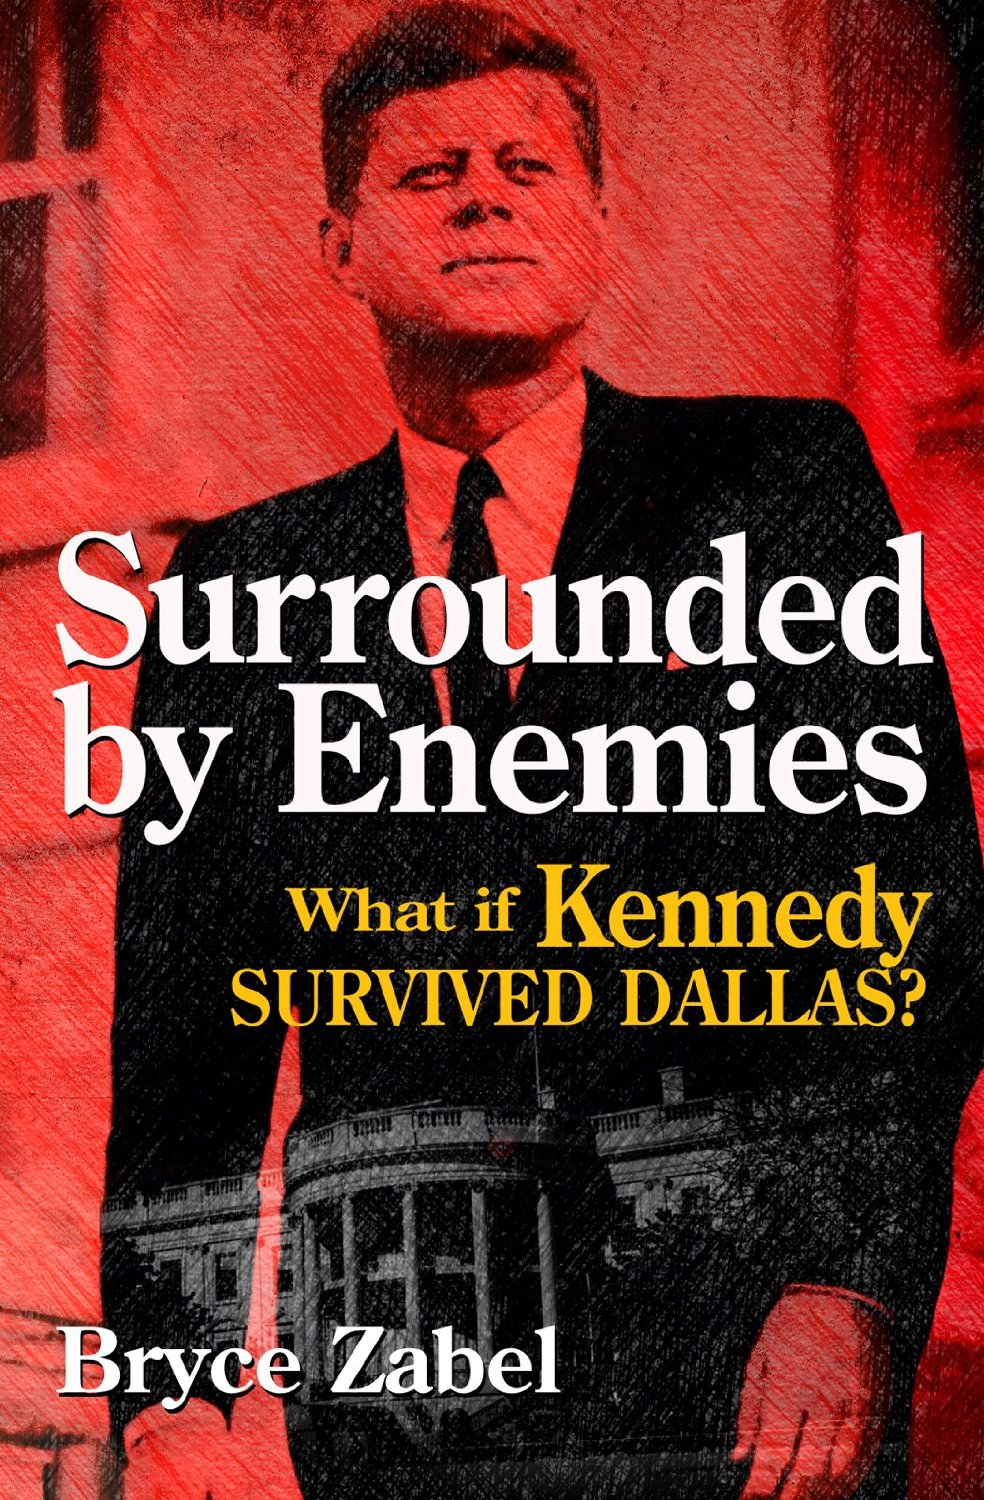 "Surrounded by Enemies: What if Kennedy Survived Dallas?" by Bryce Zabel. The alternate-history novel is available as a trade paperback, eBook and audiobook.